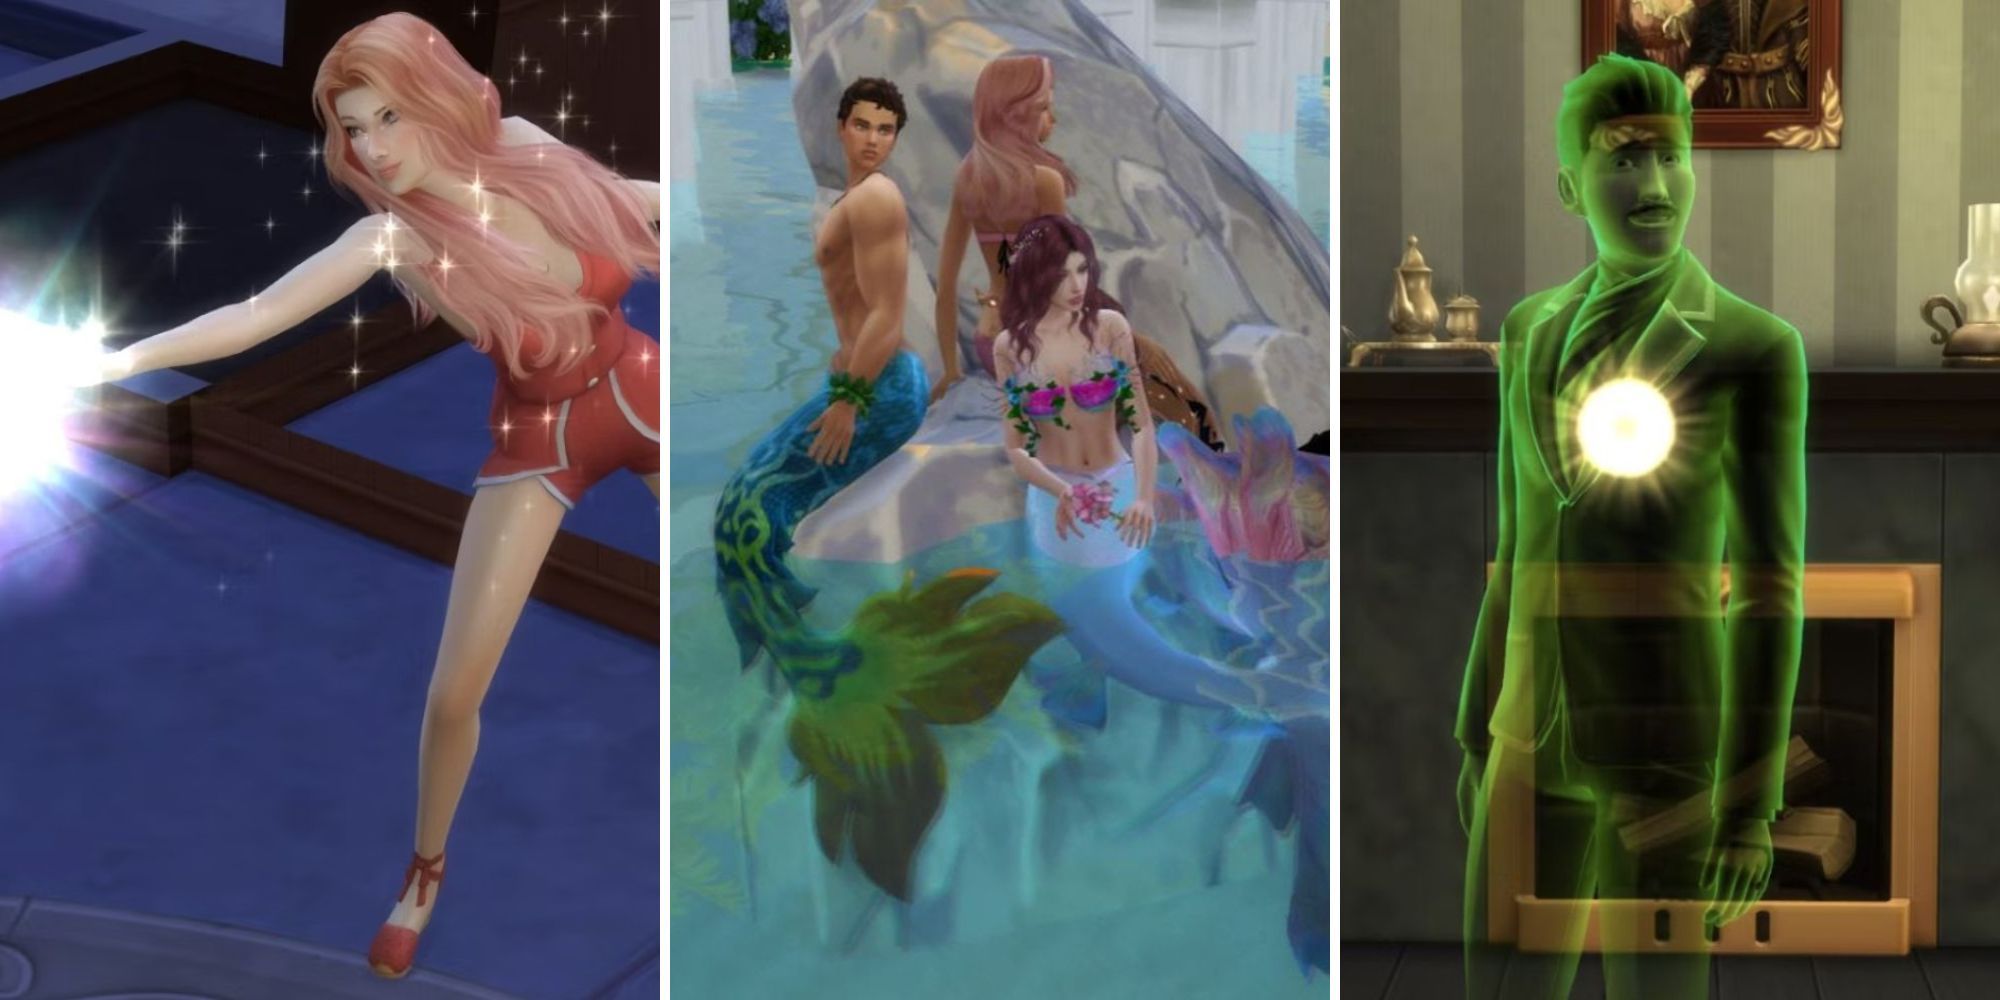 A spellcaster, mermaids, and a ghost in The Sims 4